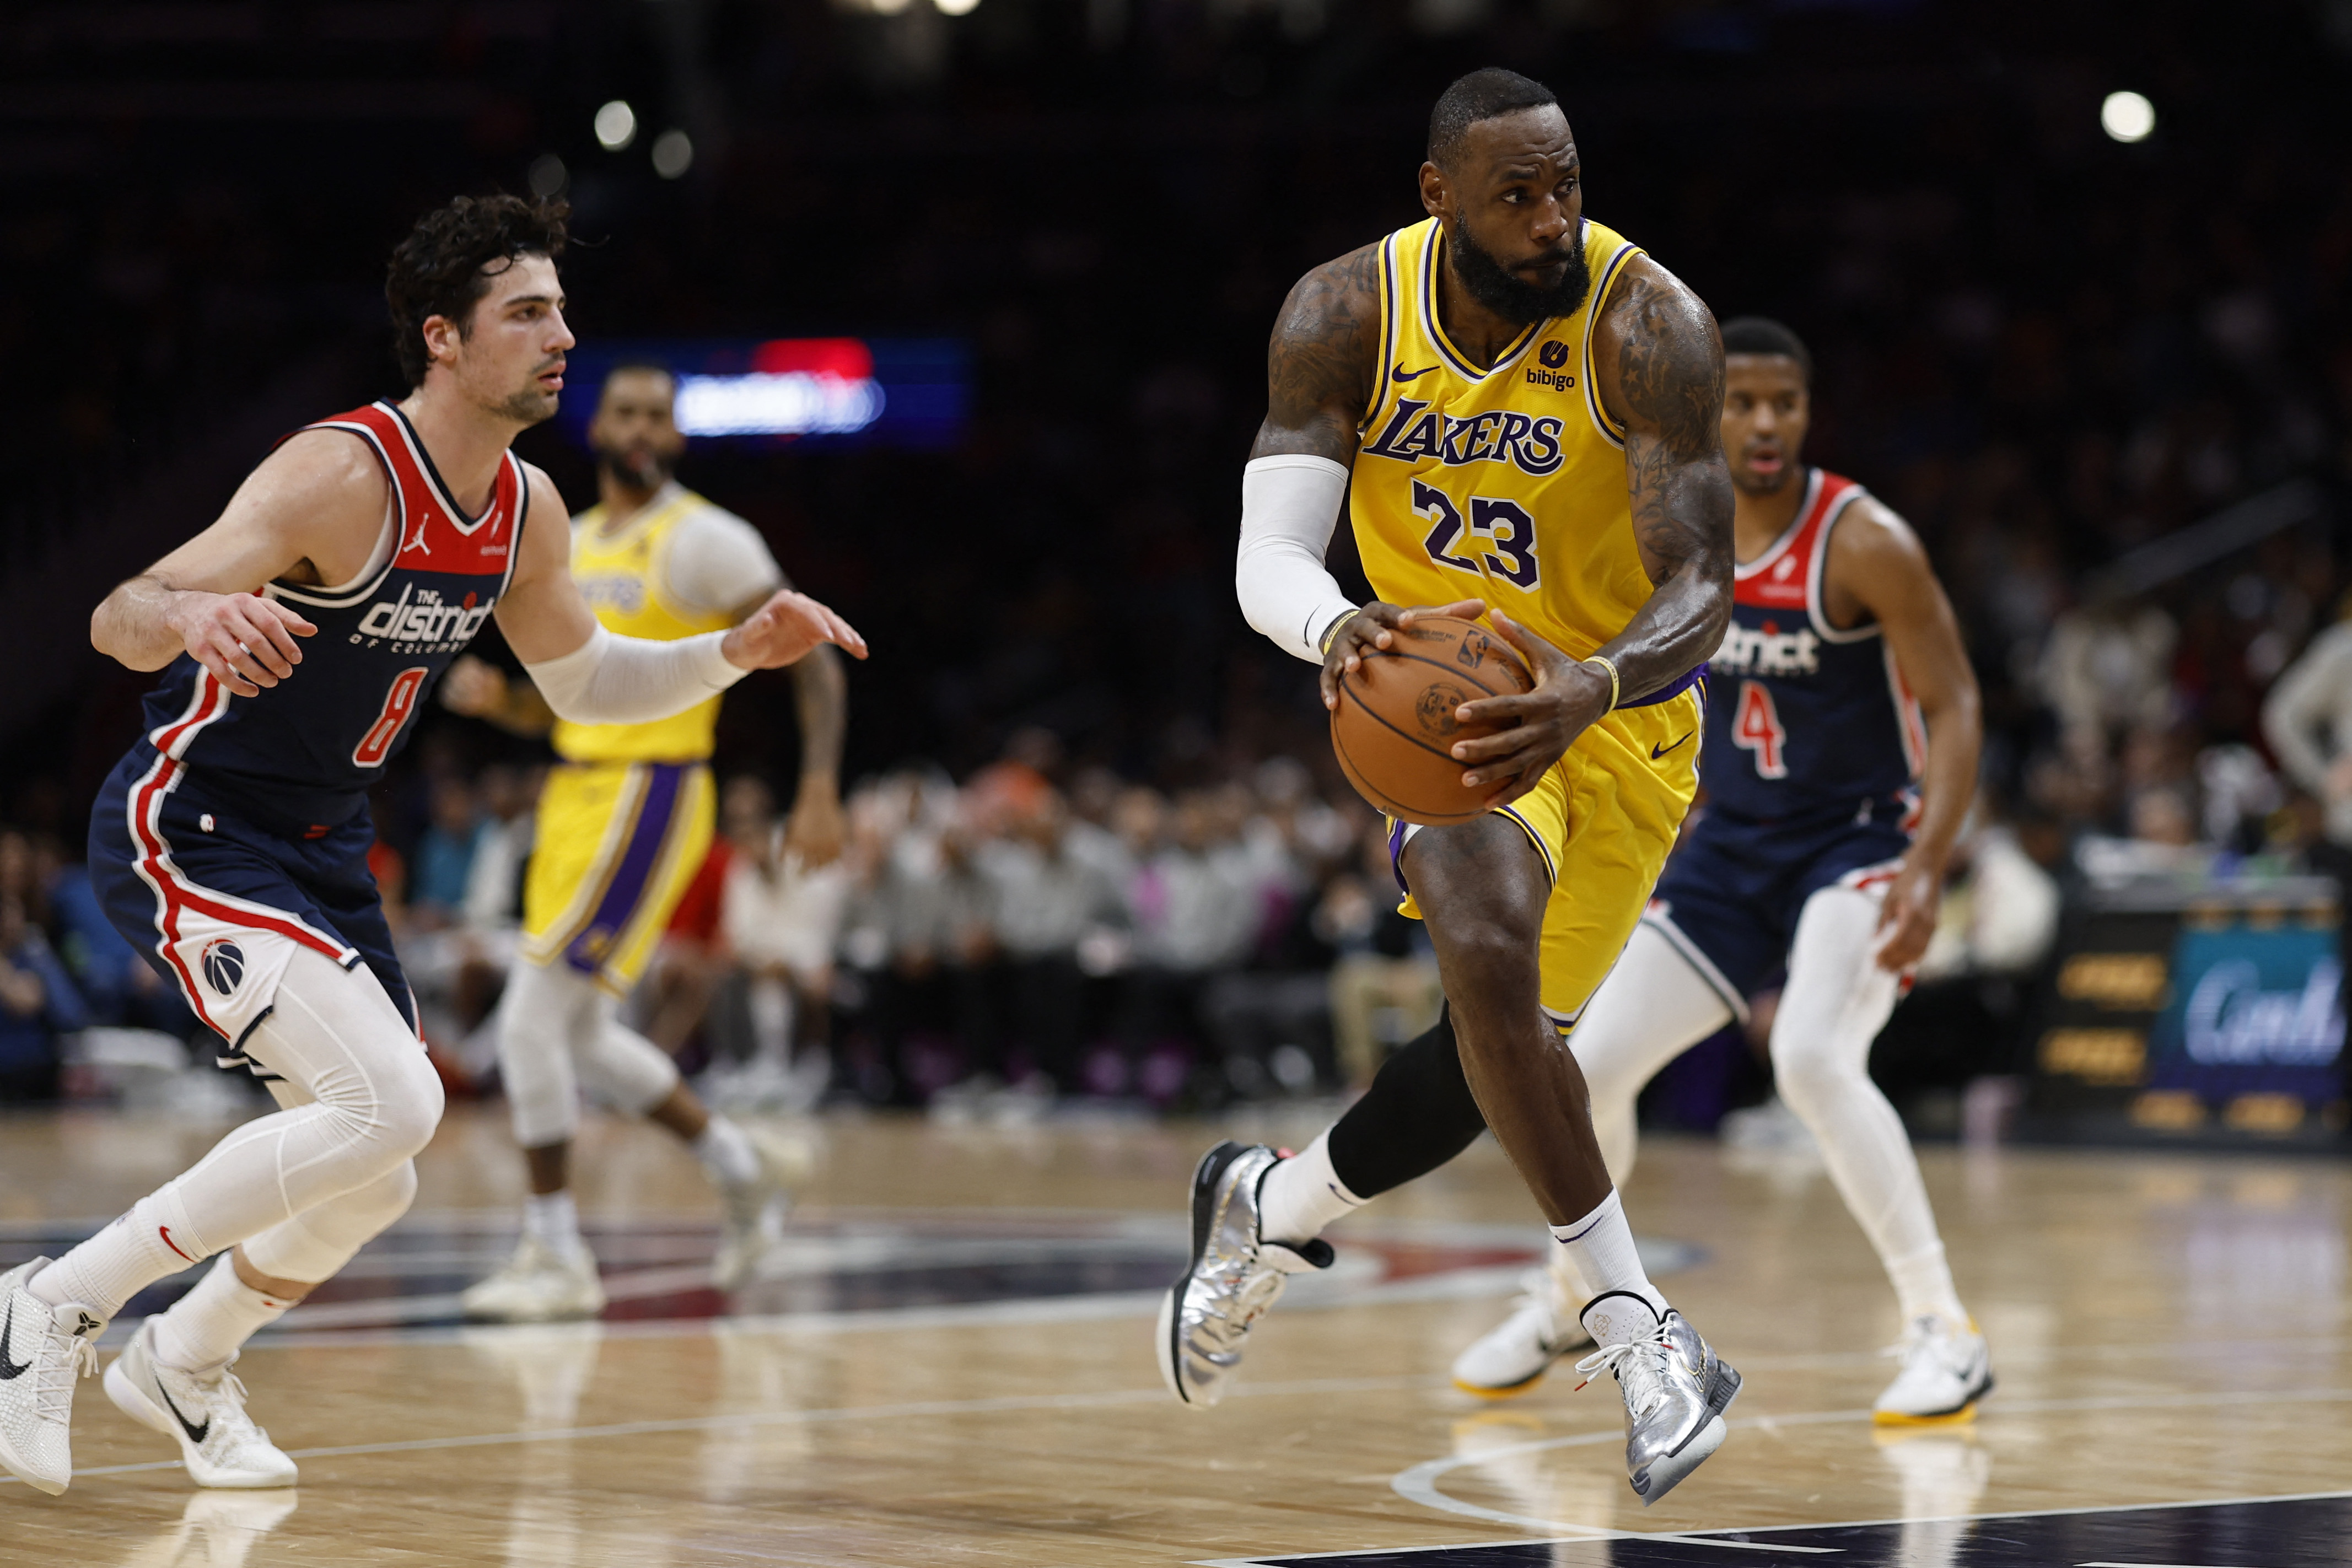 Lakers get 113 points from starters to dispatch Wizards | Reuters